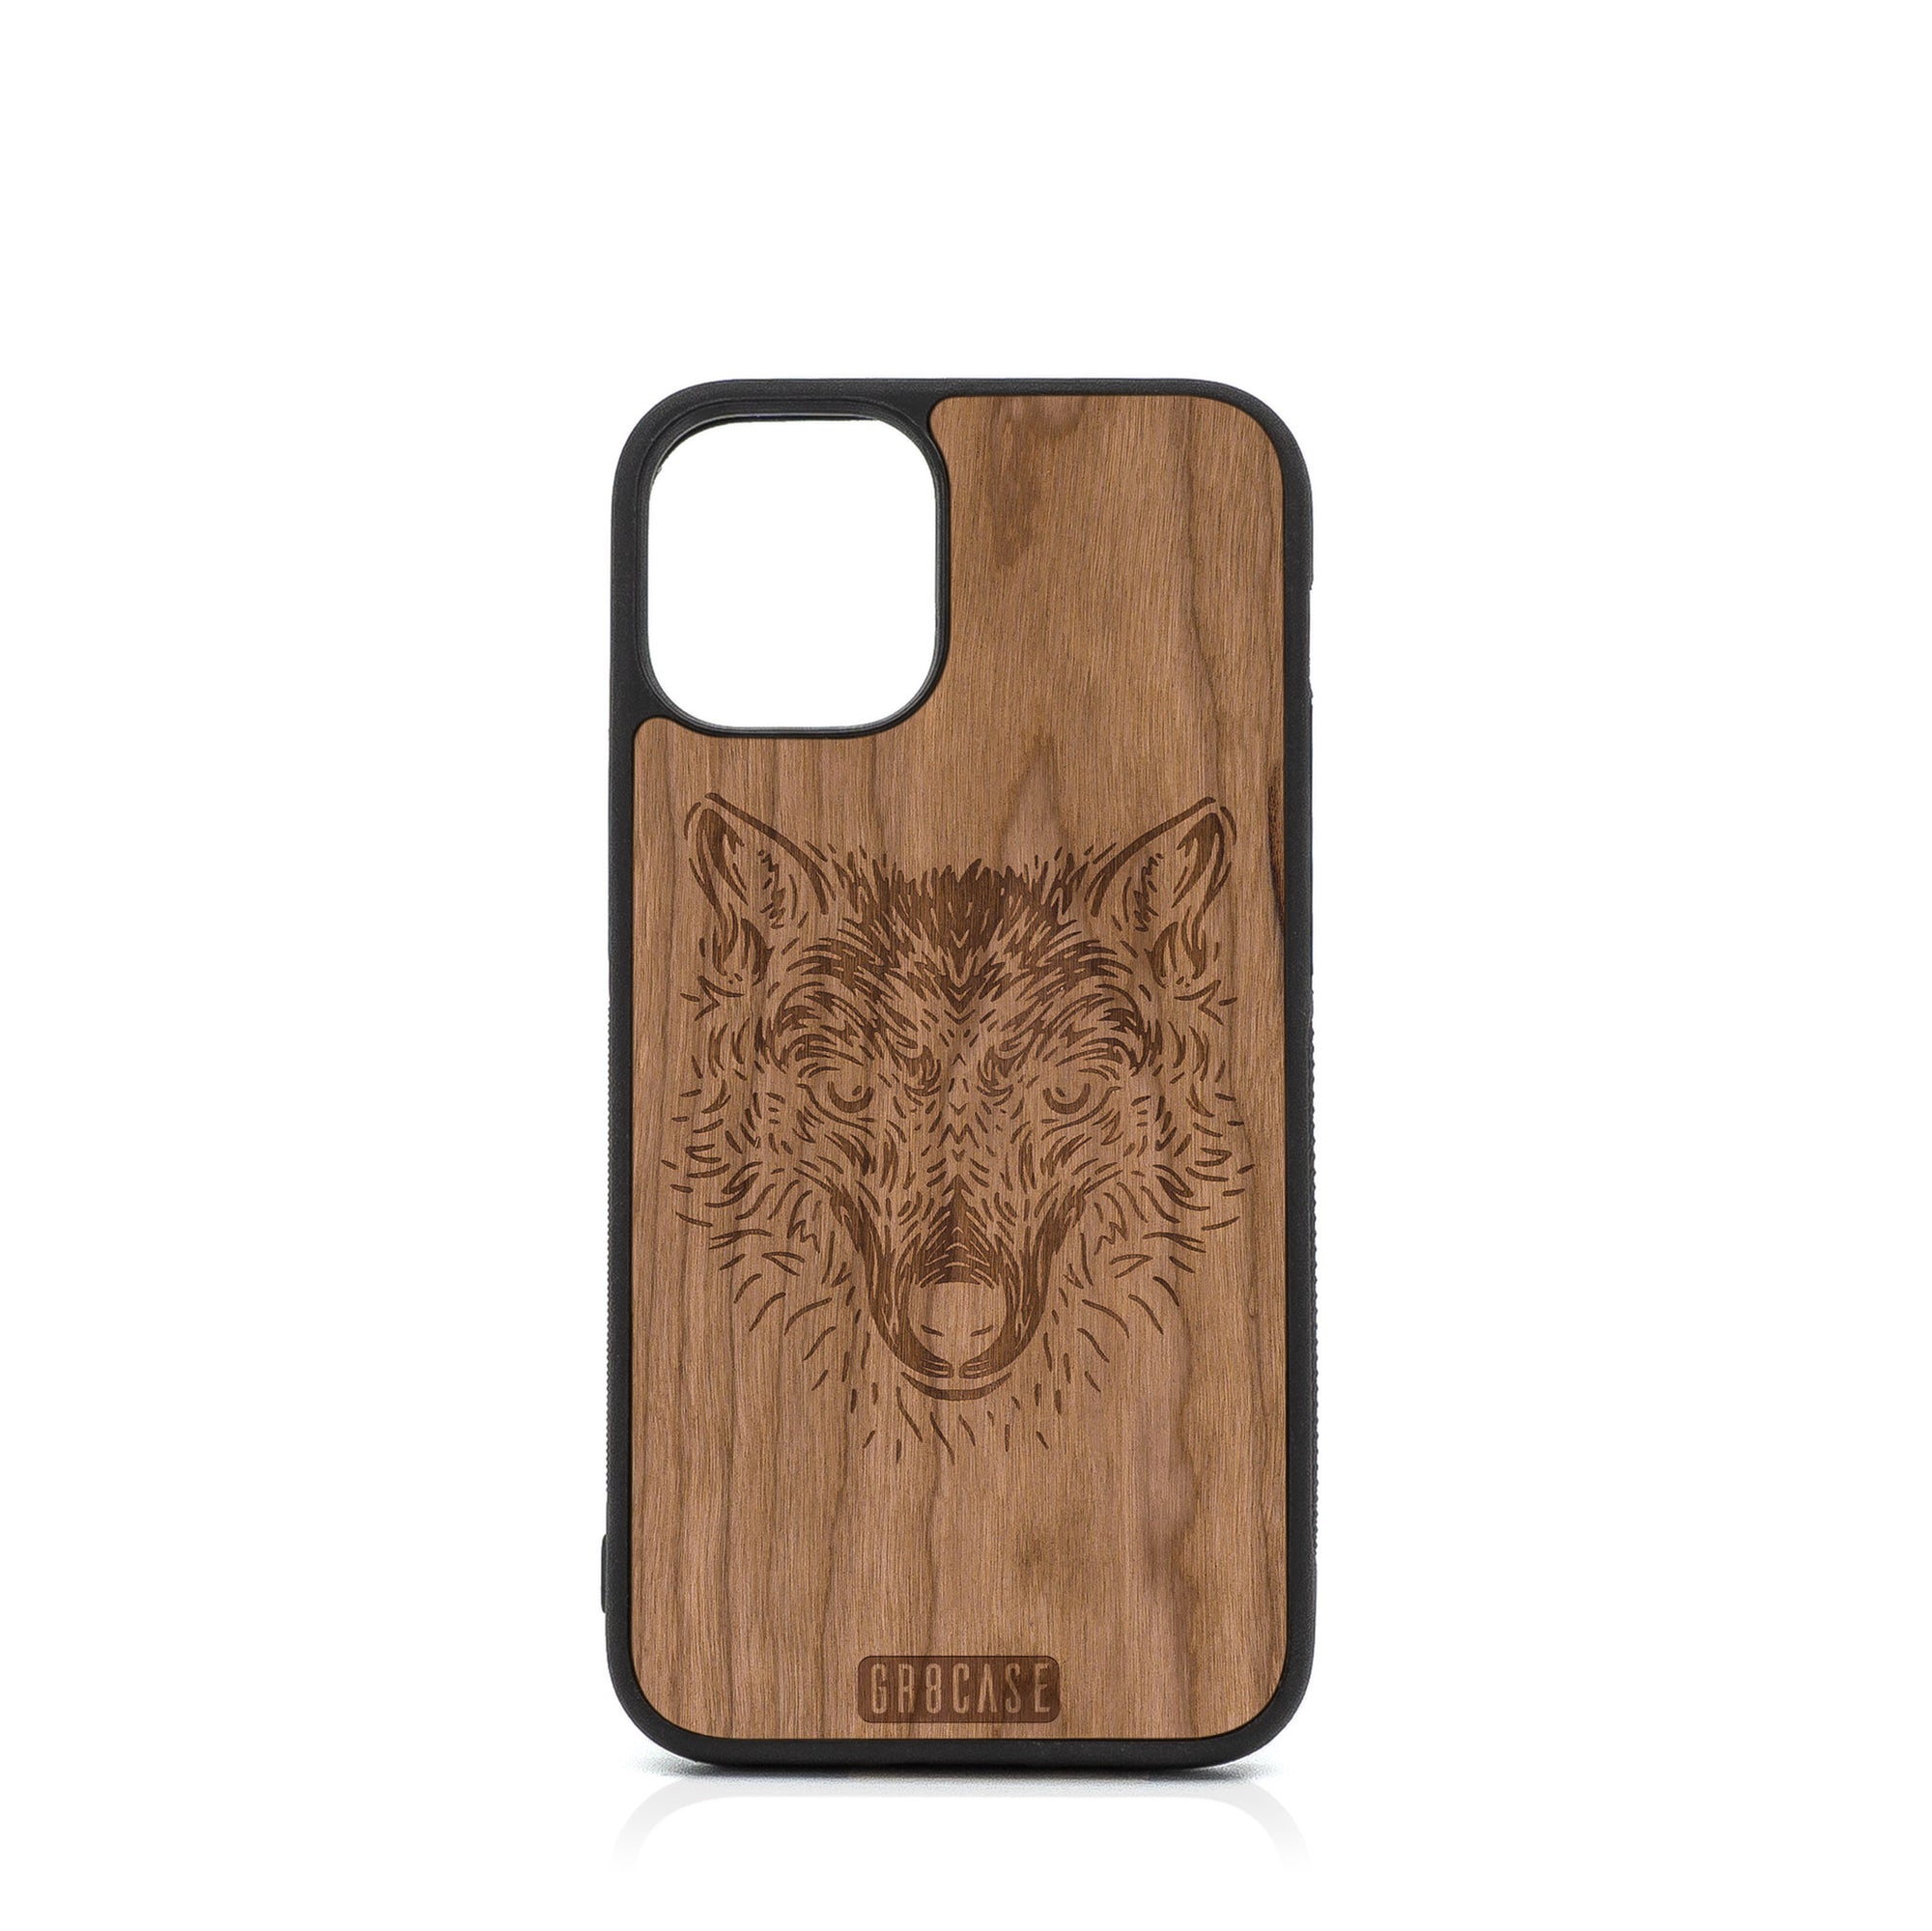 Furry Wolf Design Wood Case For iPhone 12 Mini